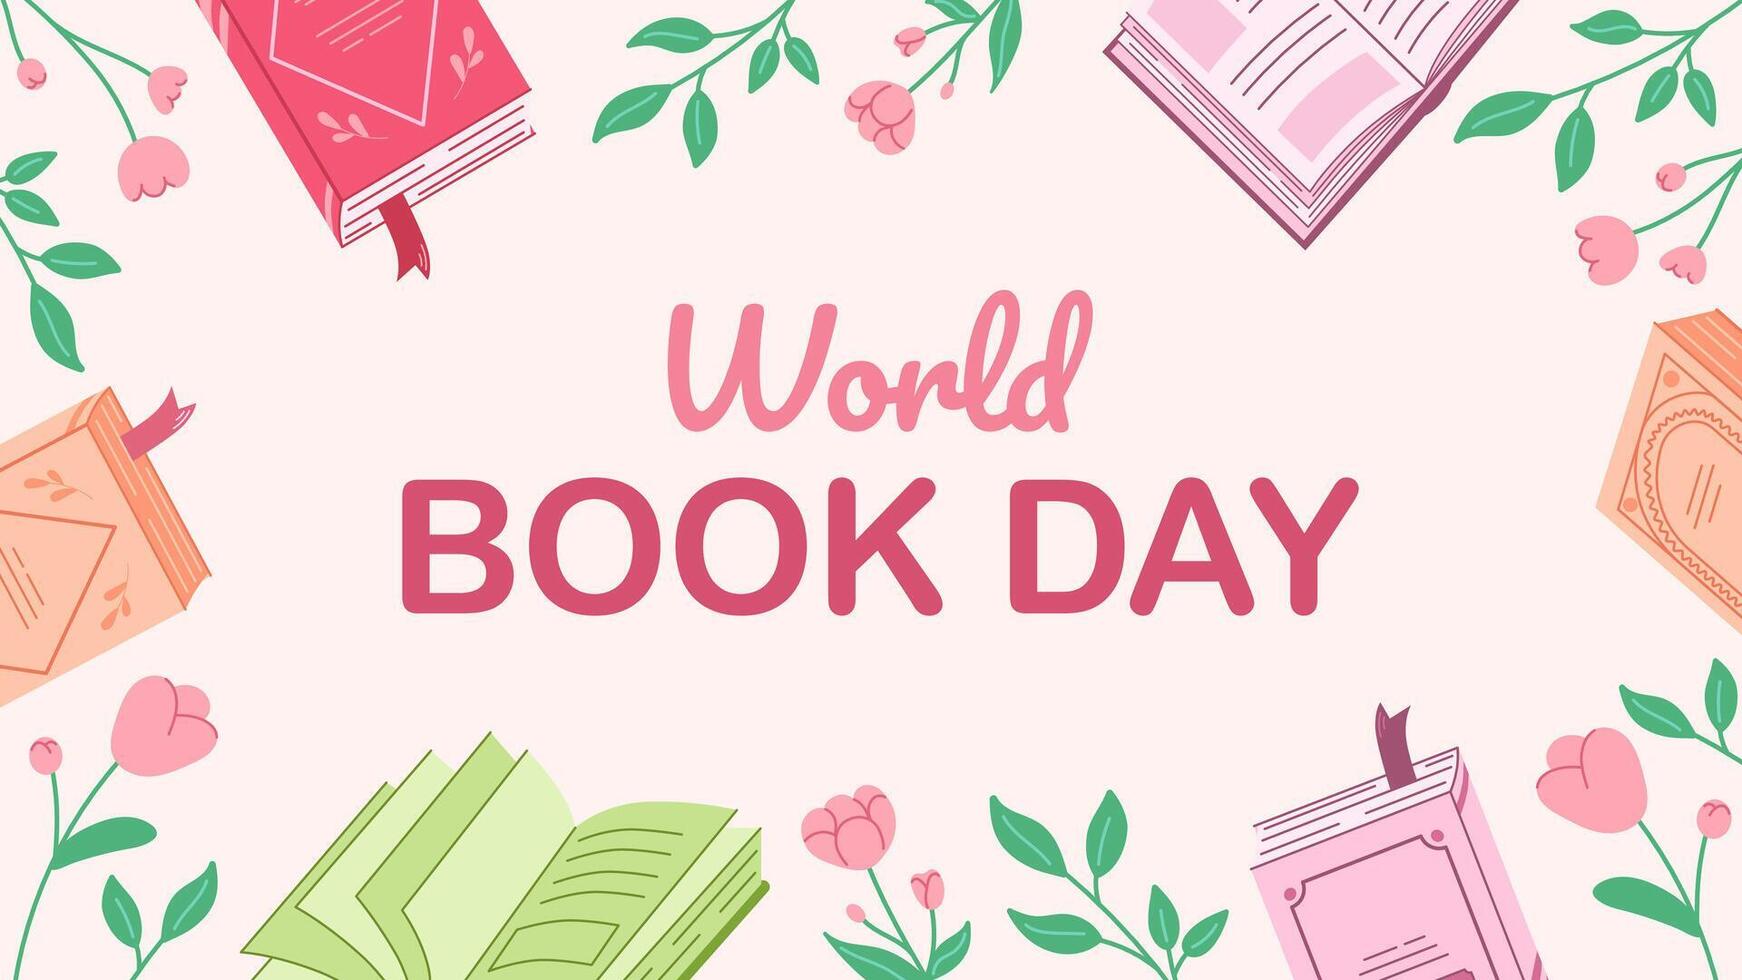 Banner for world book day celebration. Horizontal background with books for literary events in libraries, bookstores. vector